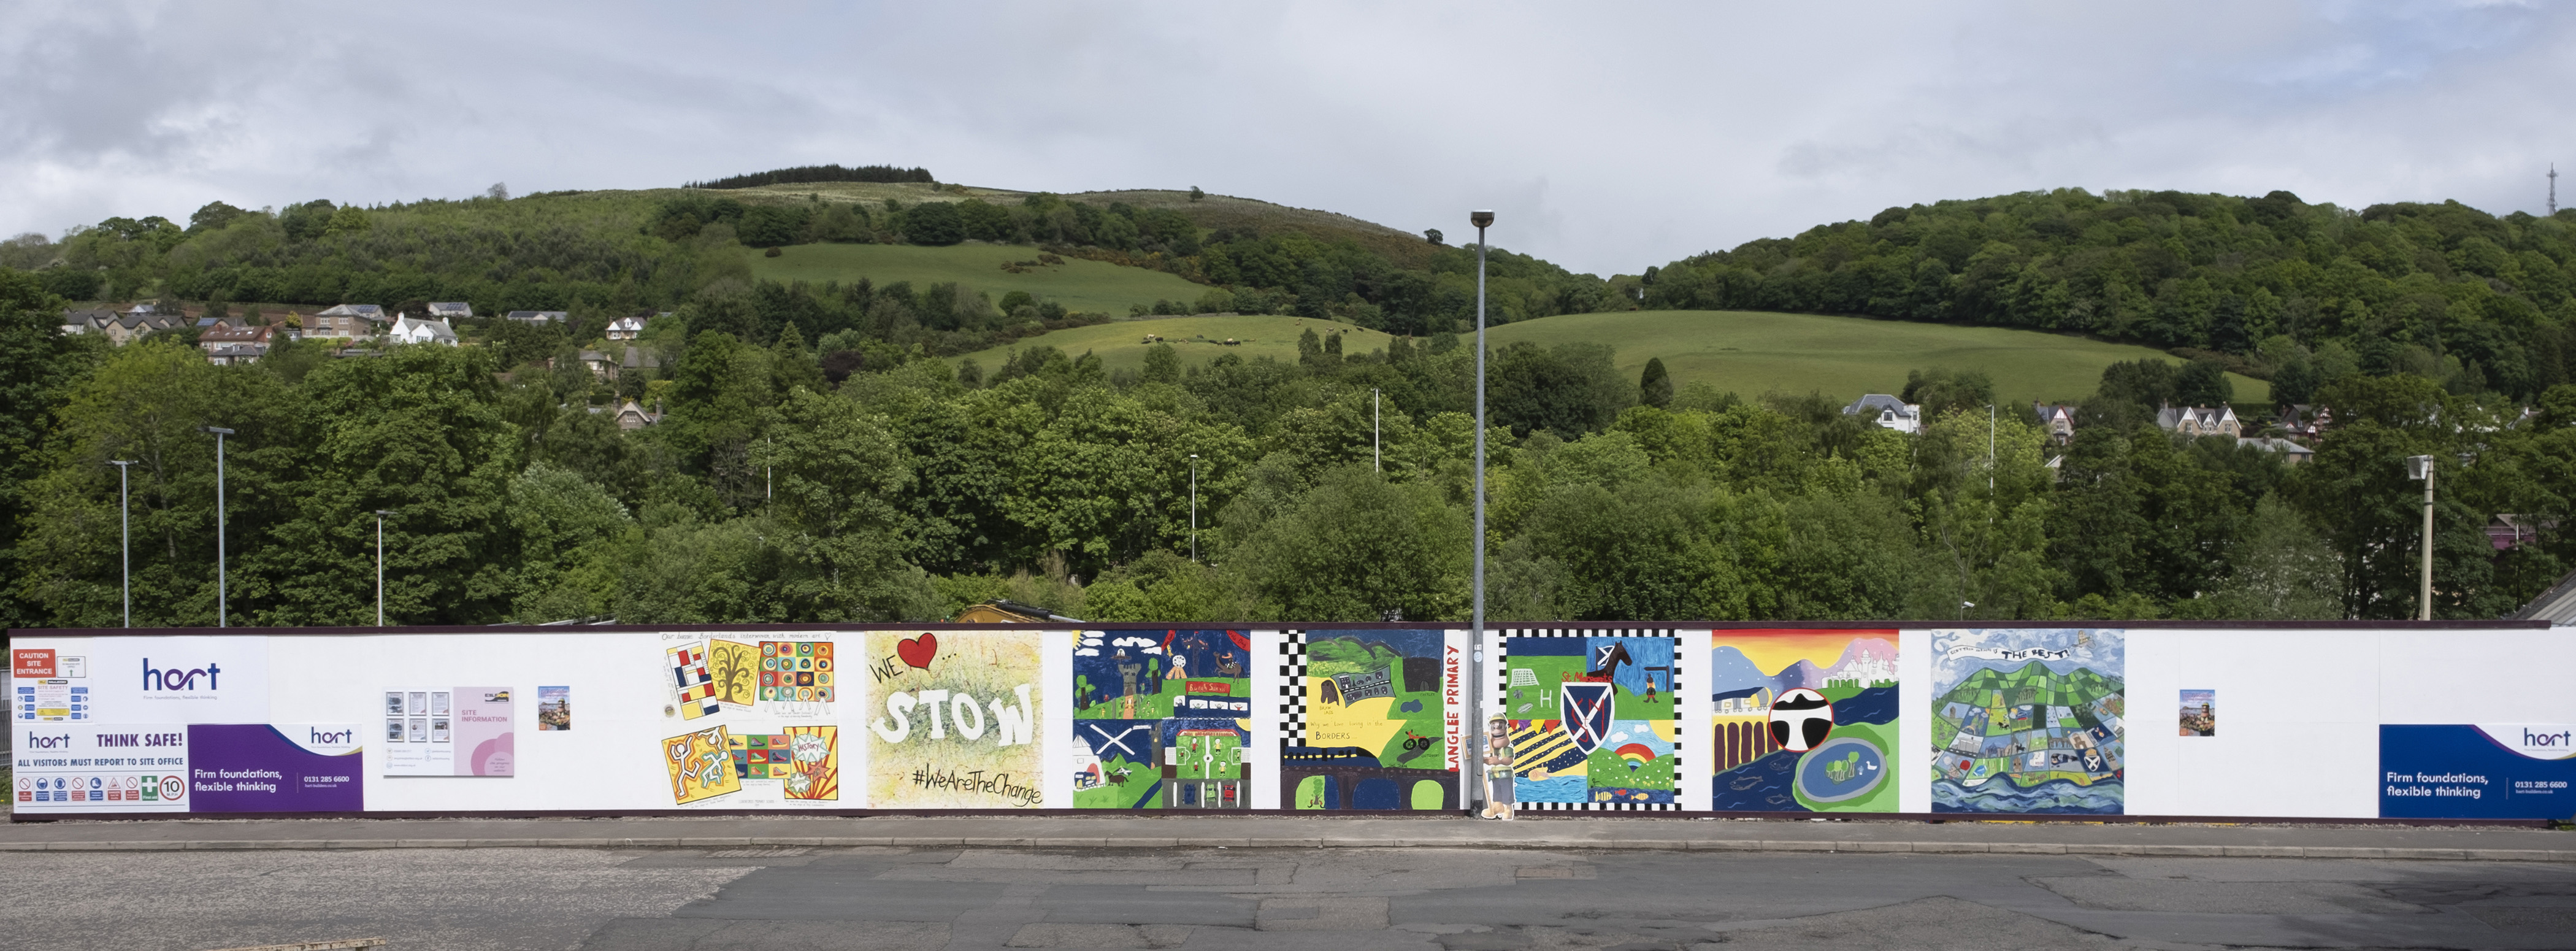 Galashiels primary schools win national competition for mural at Eildon site